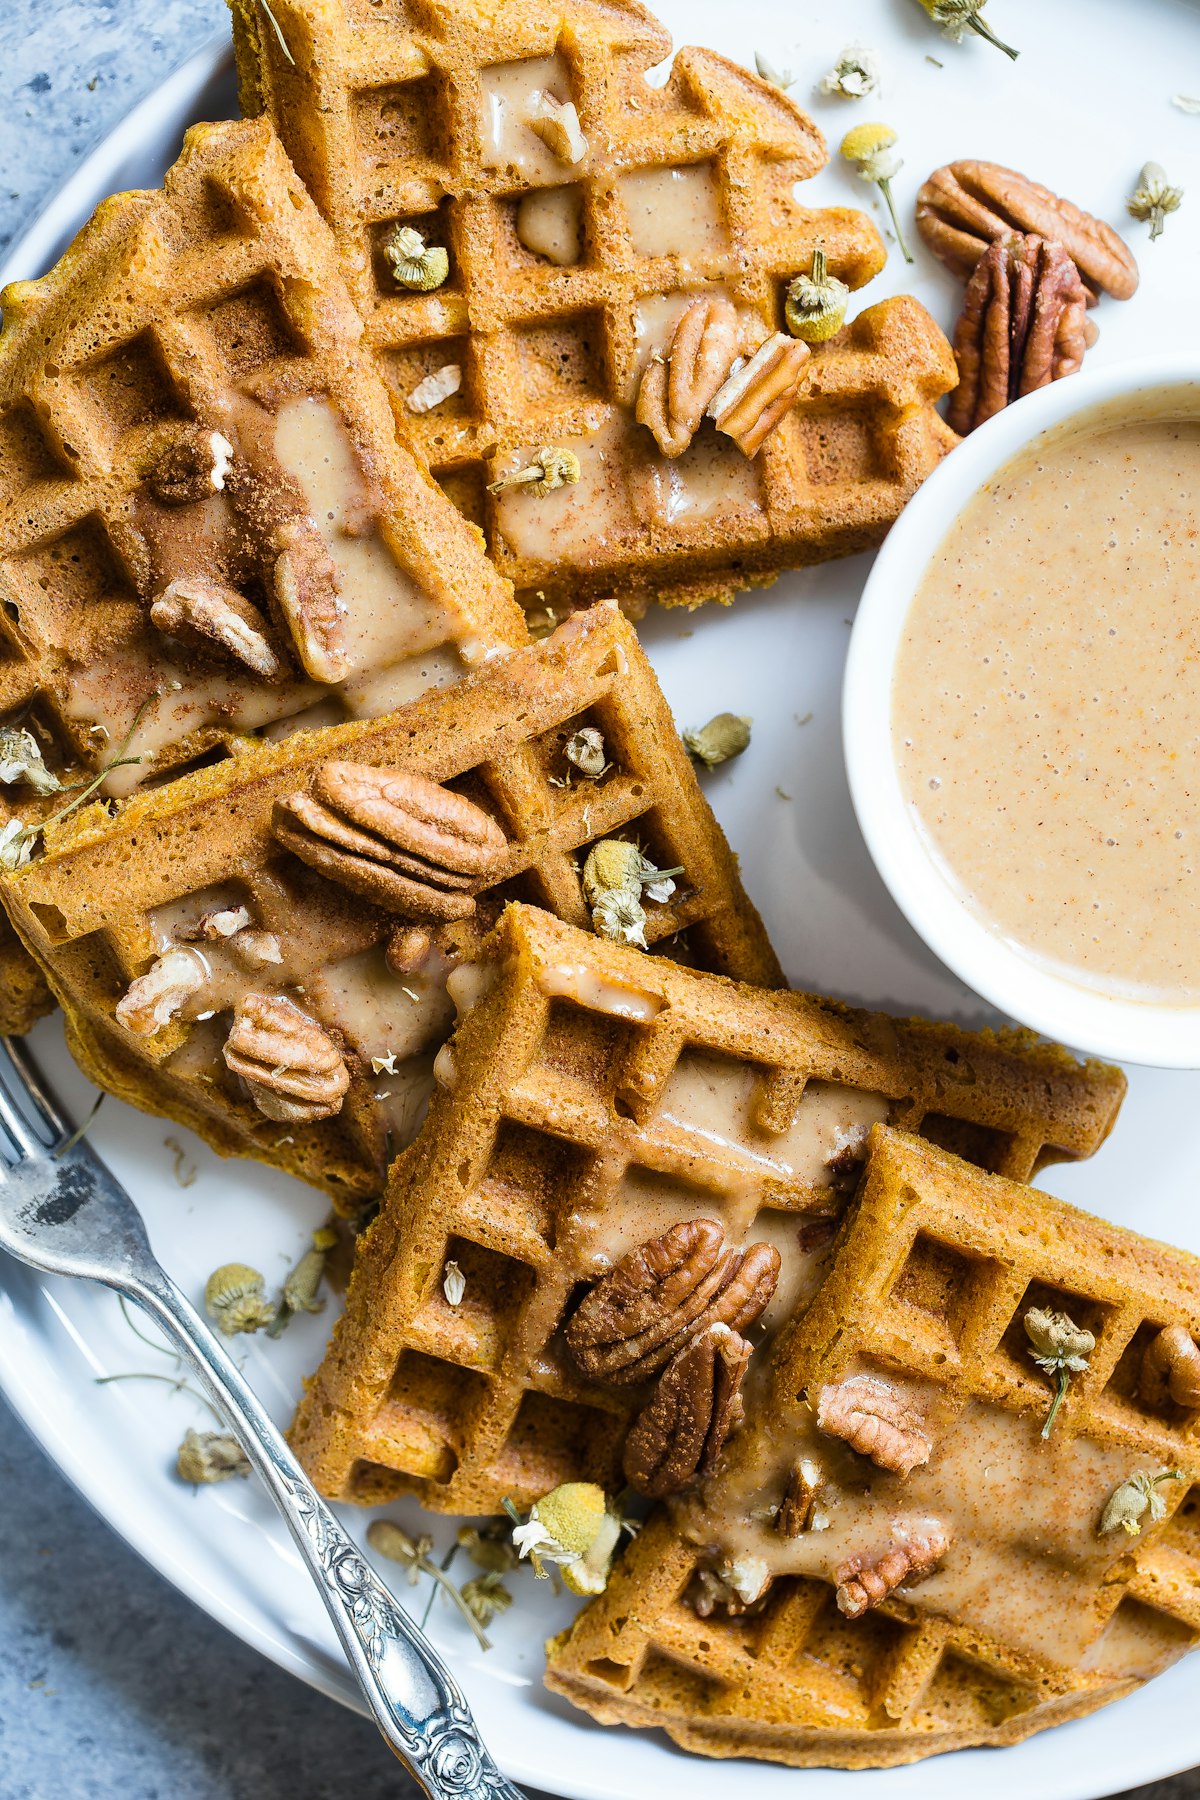 5 Best Picks Of Mini Belgian Waffle Maker For Anyone With A Tiny Kitchen